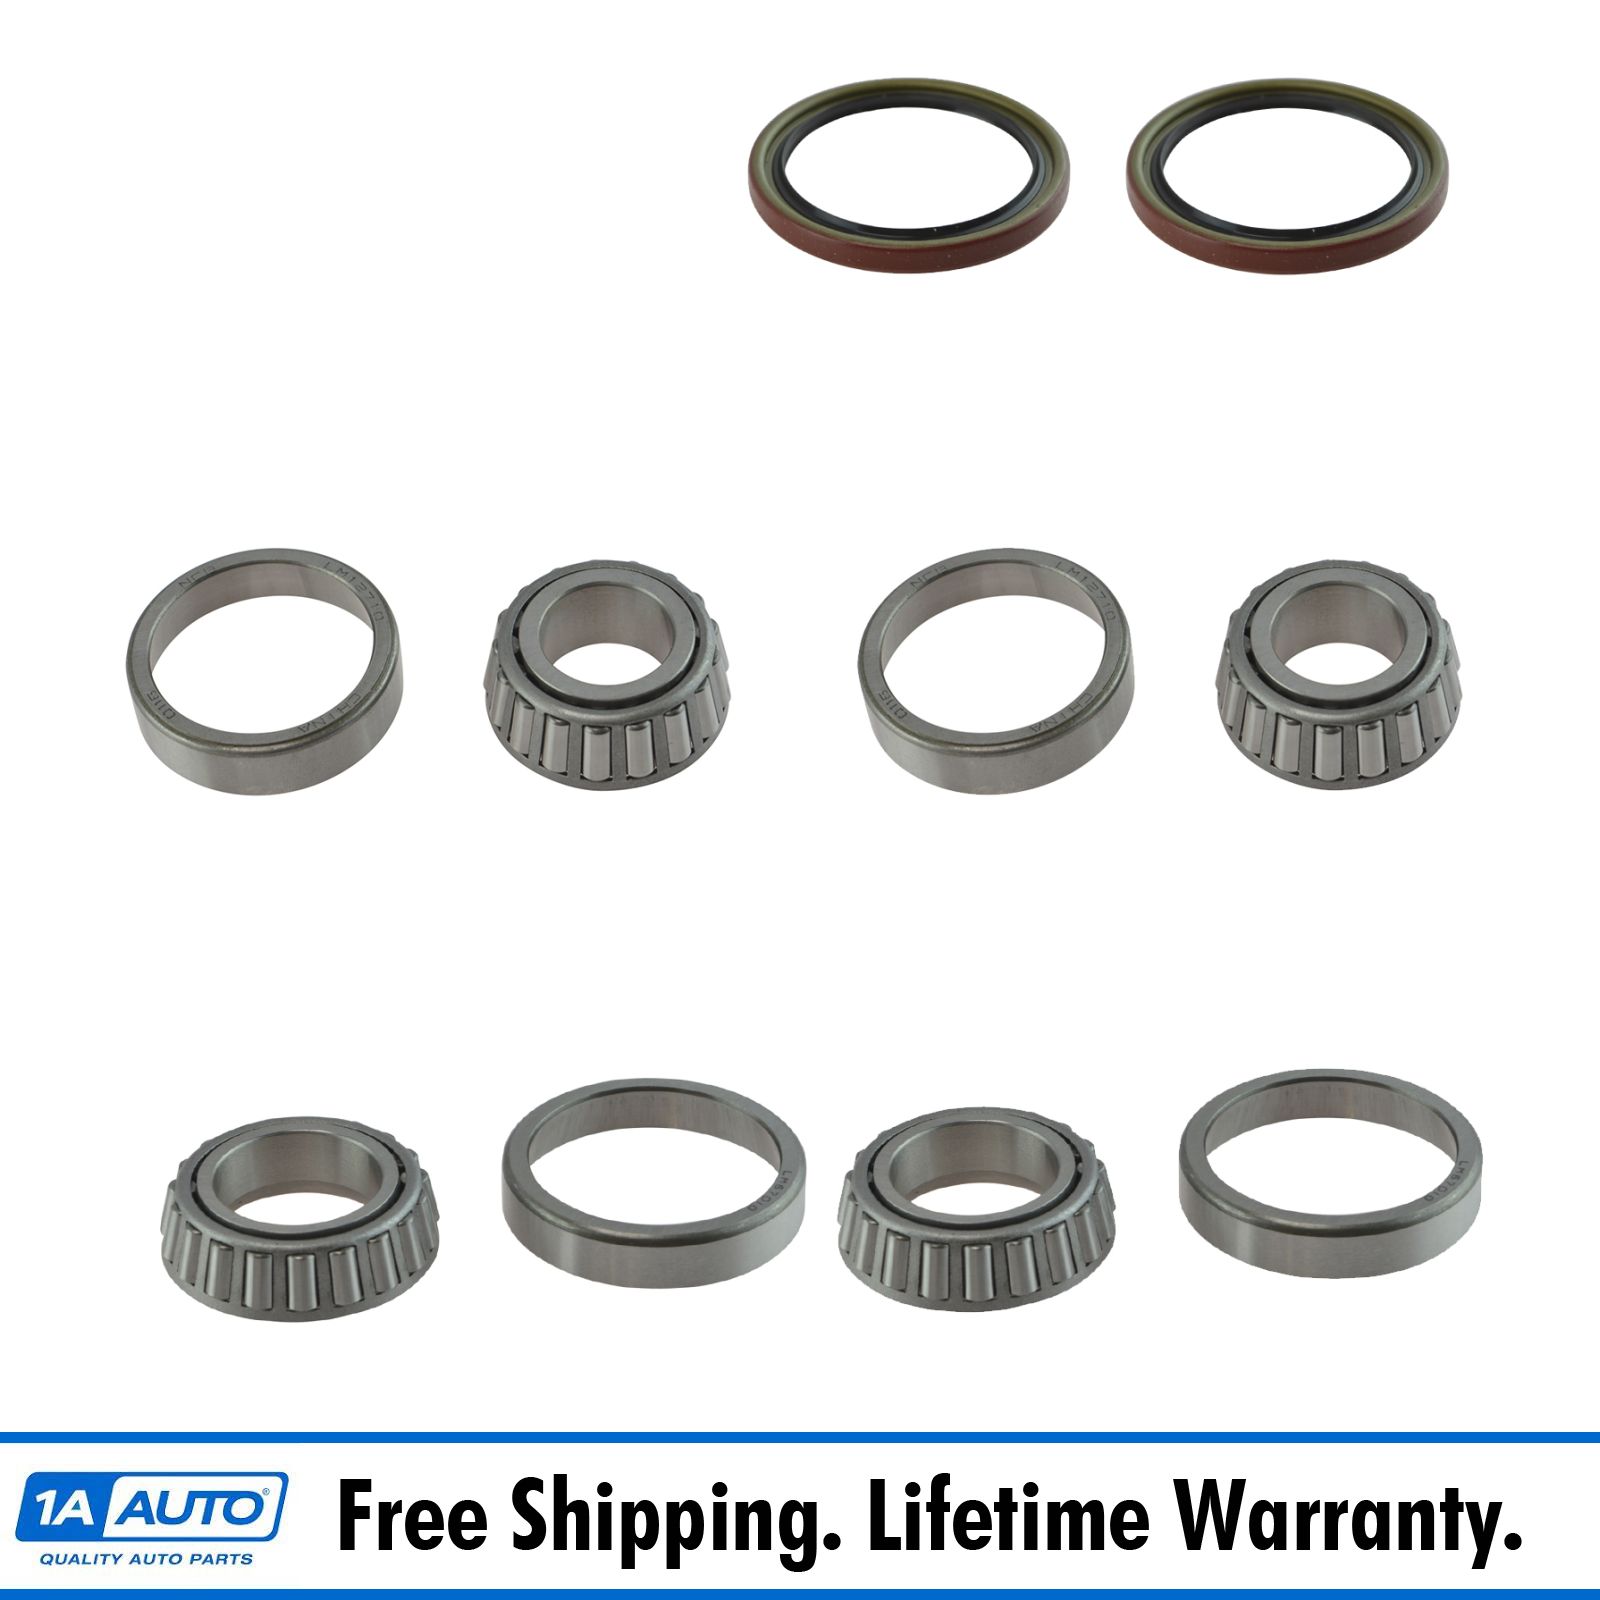 Front Inner Outer Wheel Bearing /& Seal 6 Piece Kit for Chevy S10 Regal El Camino